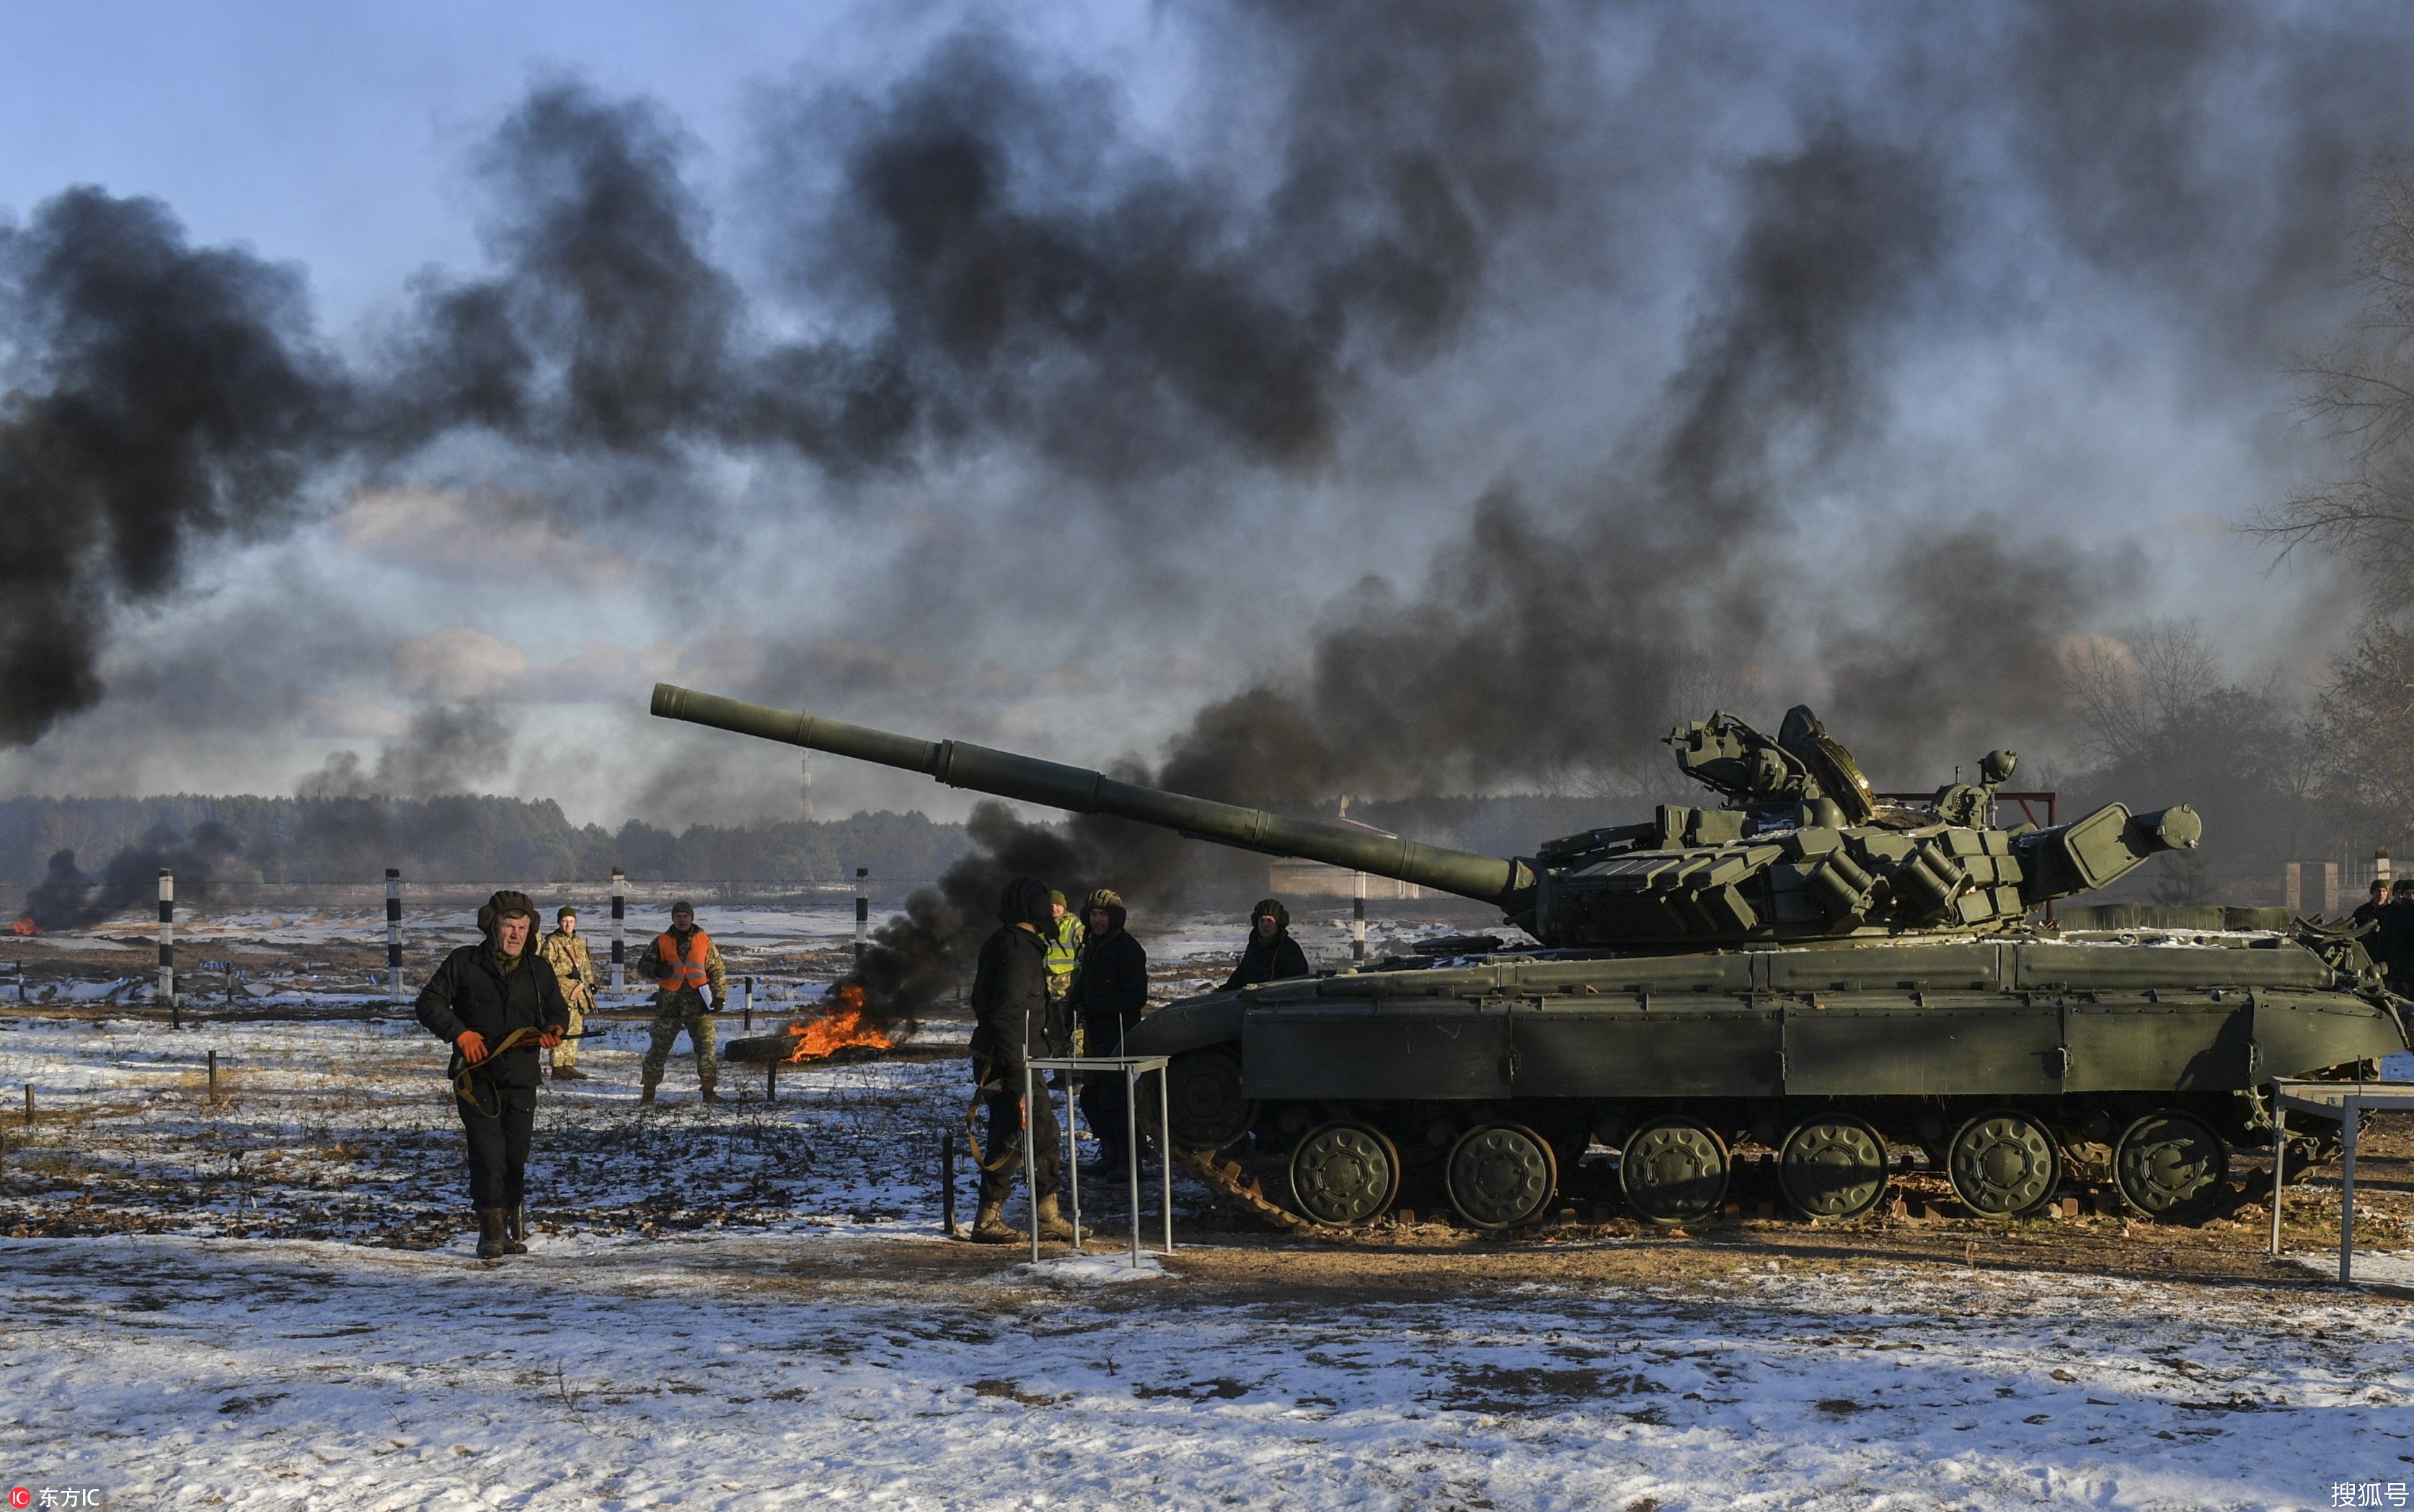 Russia Warns of New Cold War as Violence in East Ukraine Surges - World ...